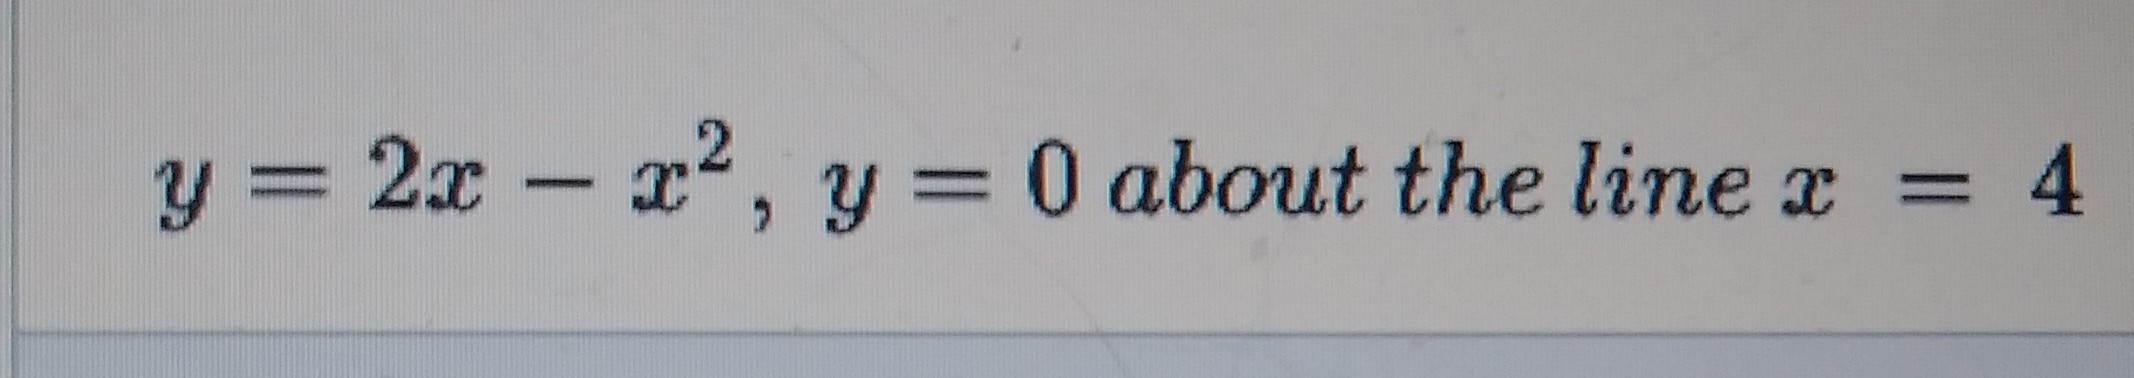 y = 2x-
x', y = 0 about the line x =
